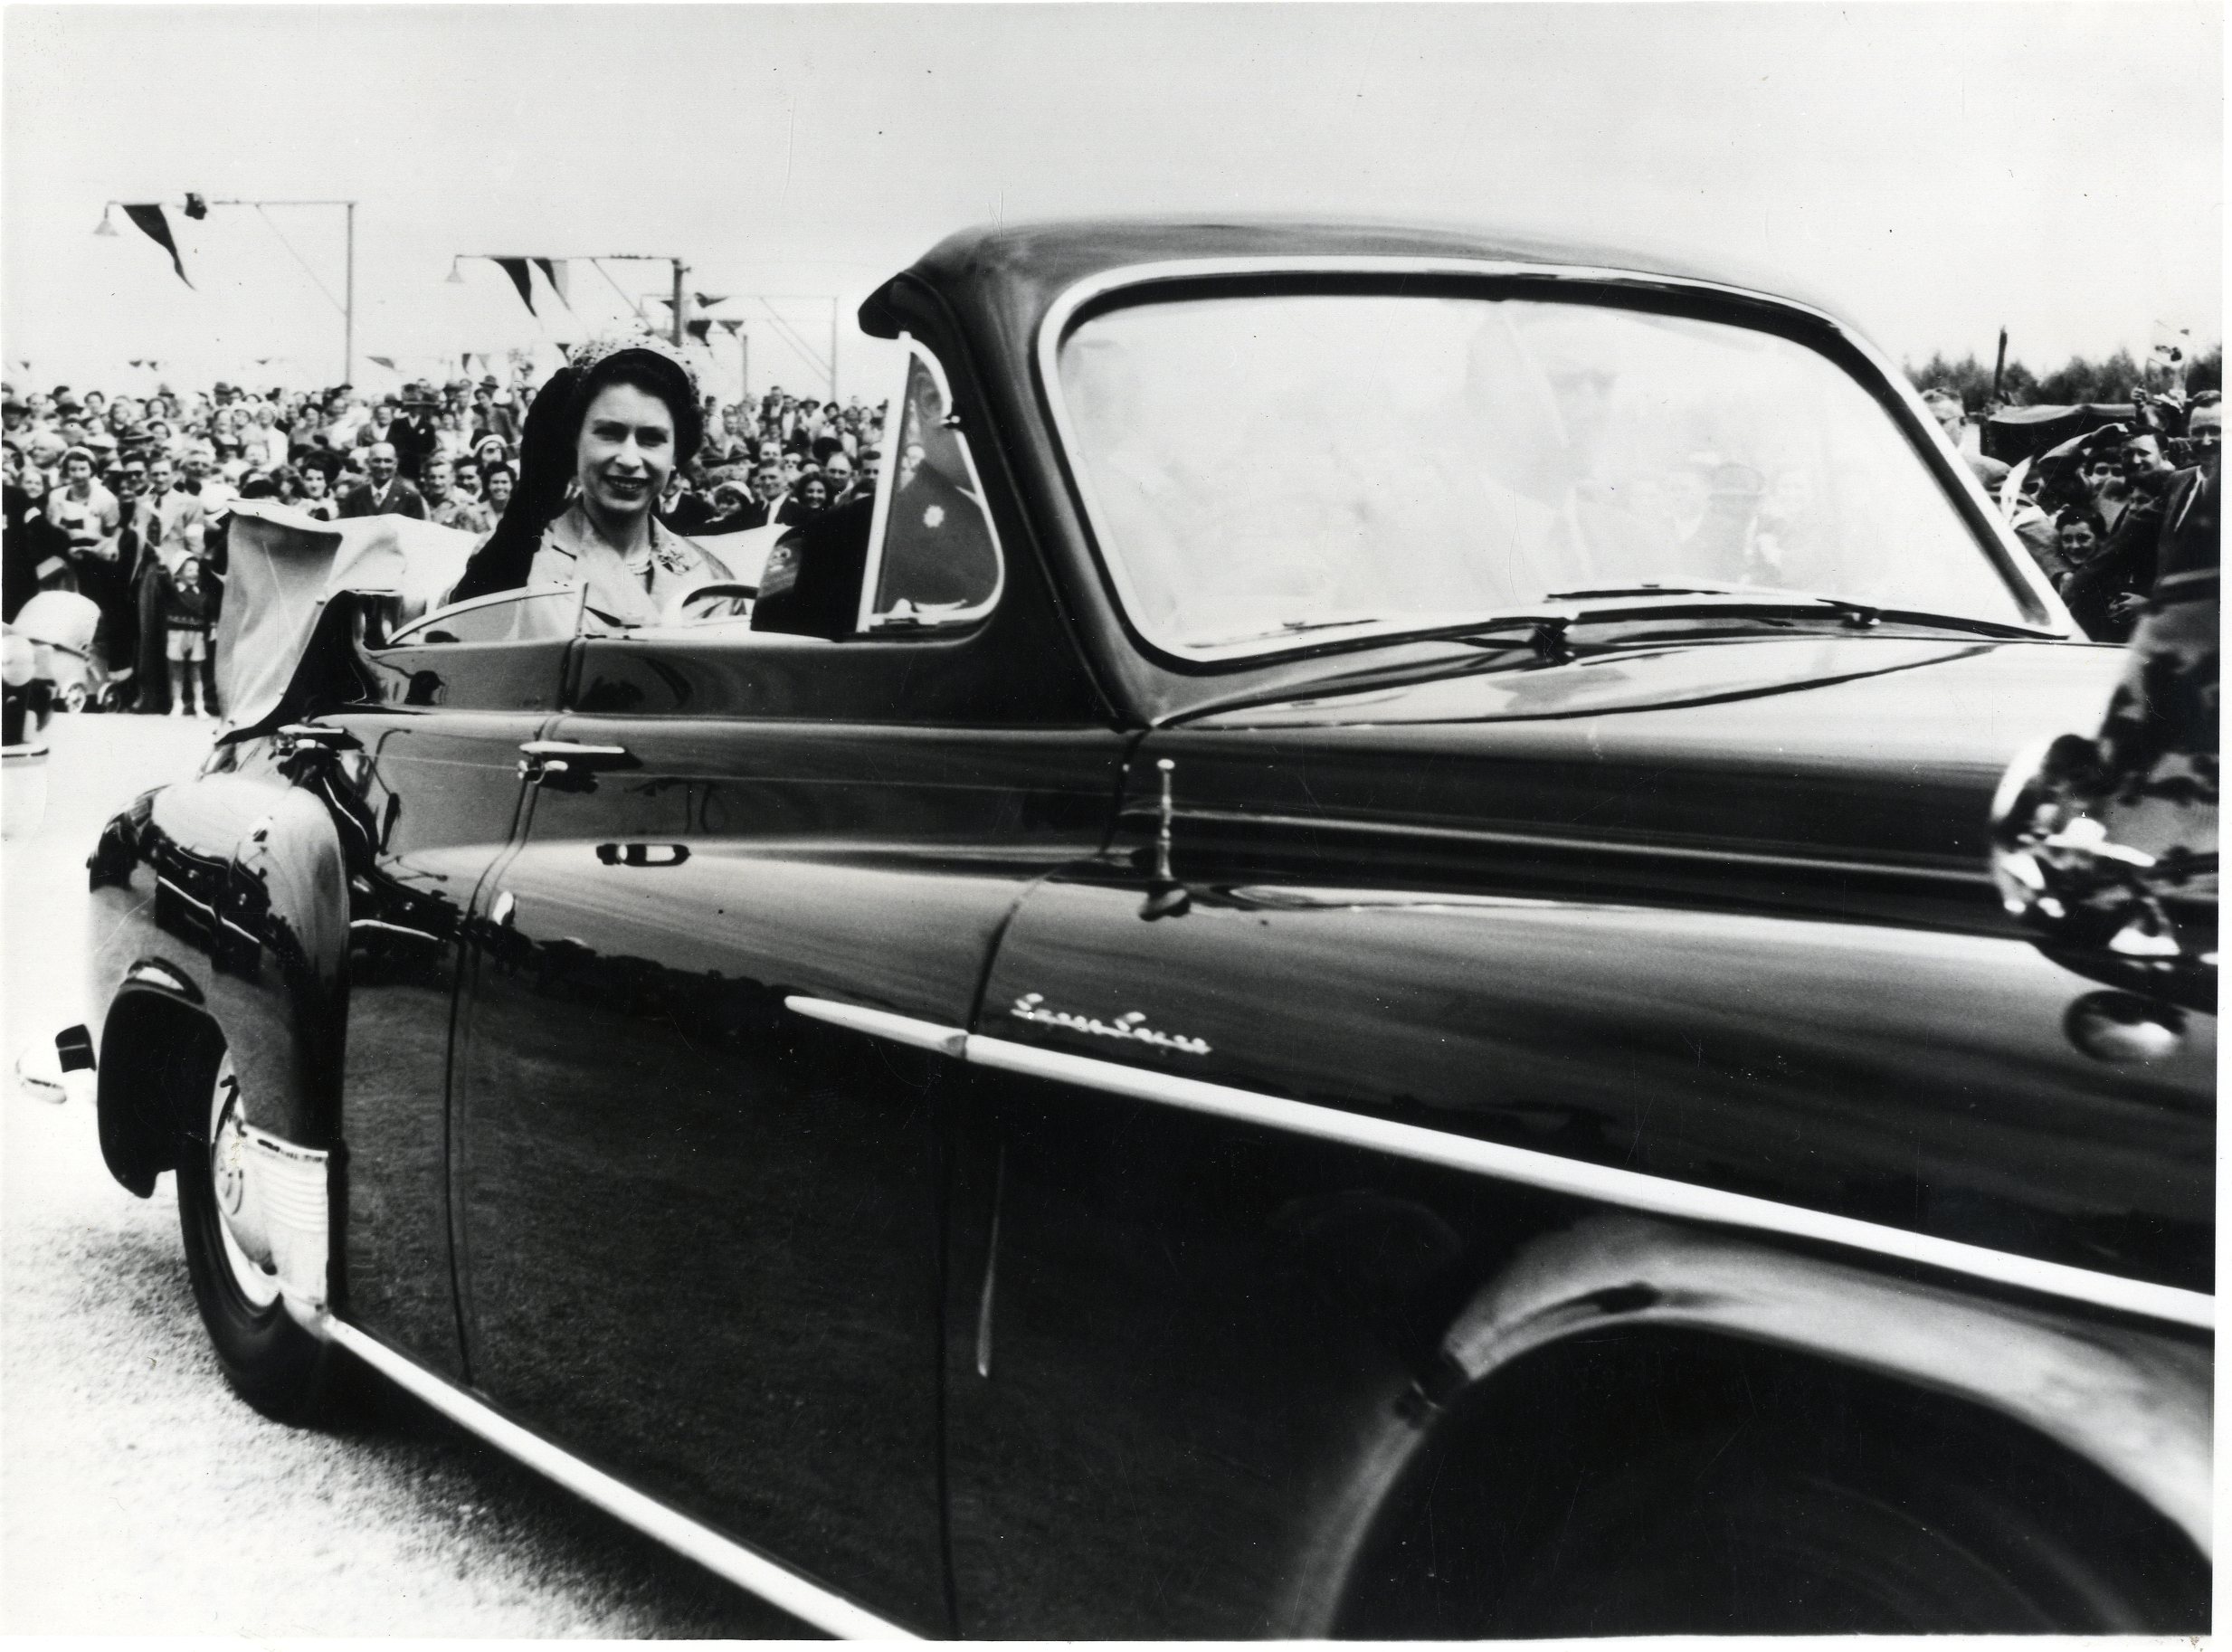 A black and white photograph of HM Queen Elizabeth II in an open top car, smiling and waving towards the camera. A crowd of people have gathered to watch, and there is bunting hanging from street lamps in the background.